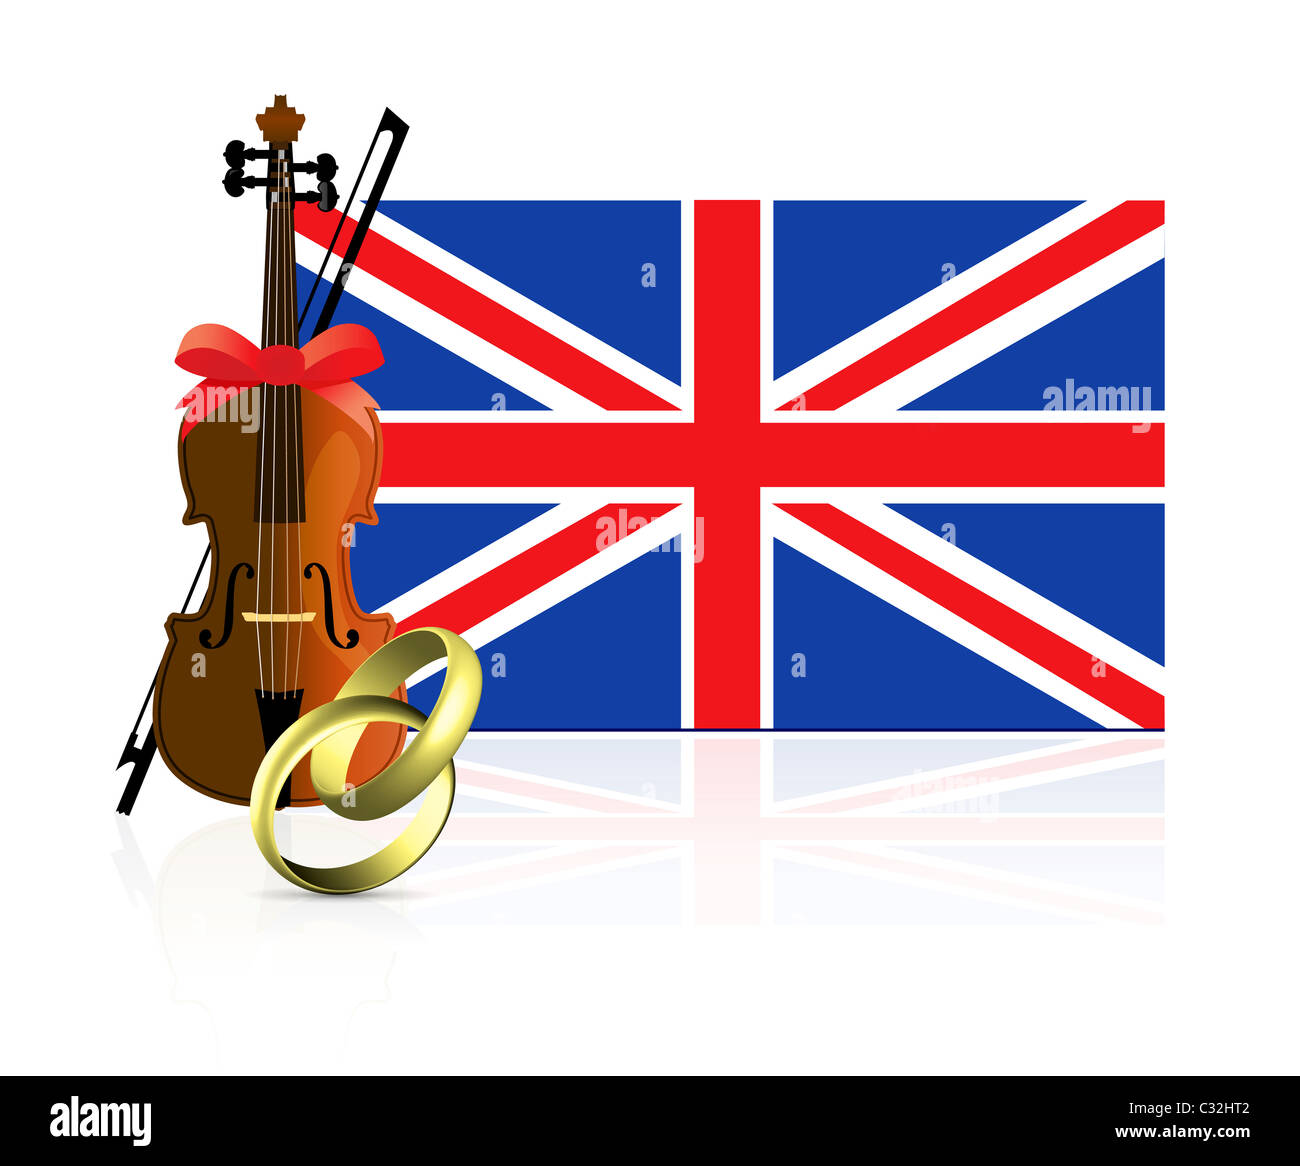 Royal wedding of Prince William and Kate Middleton. Vector illustration Stock Photo